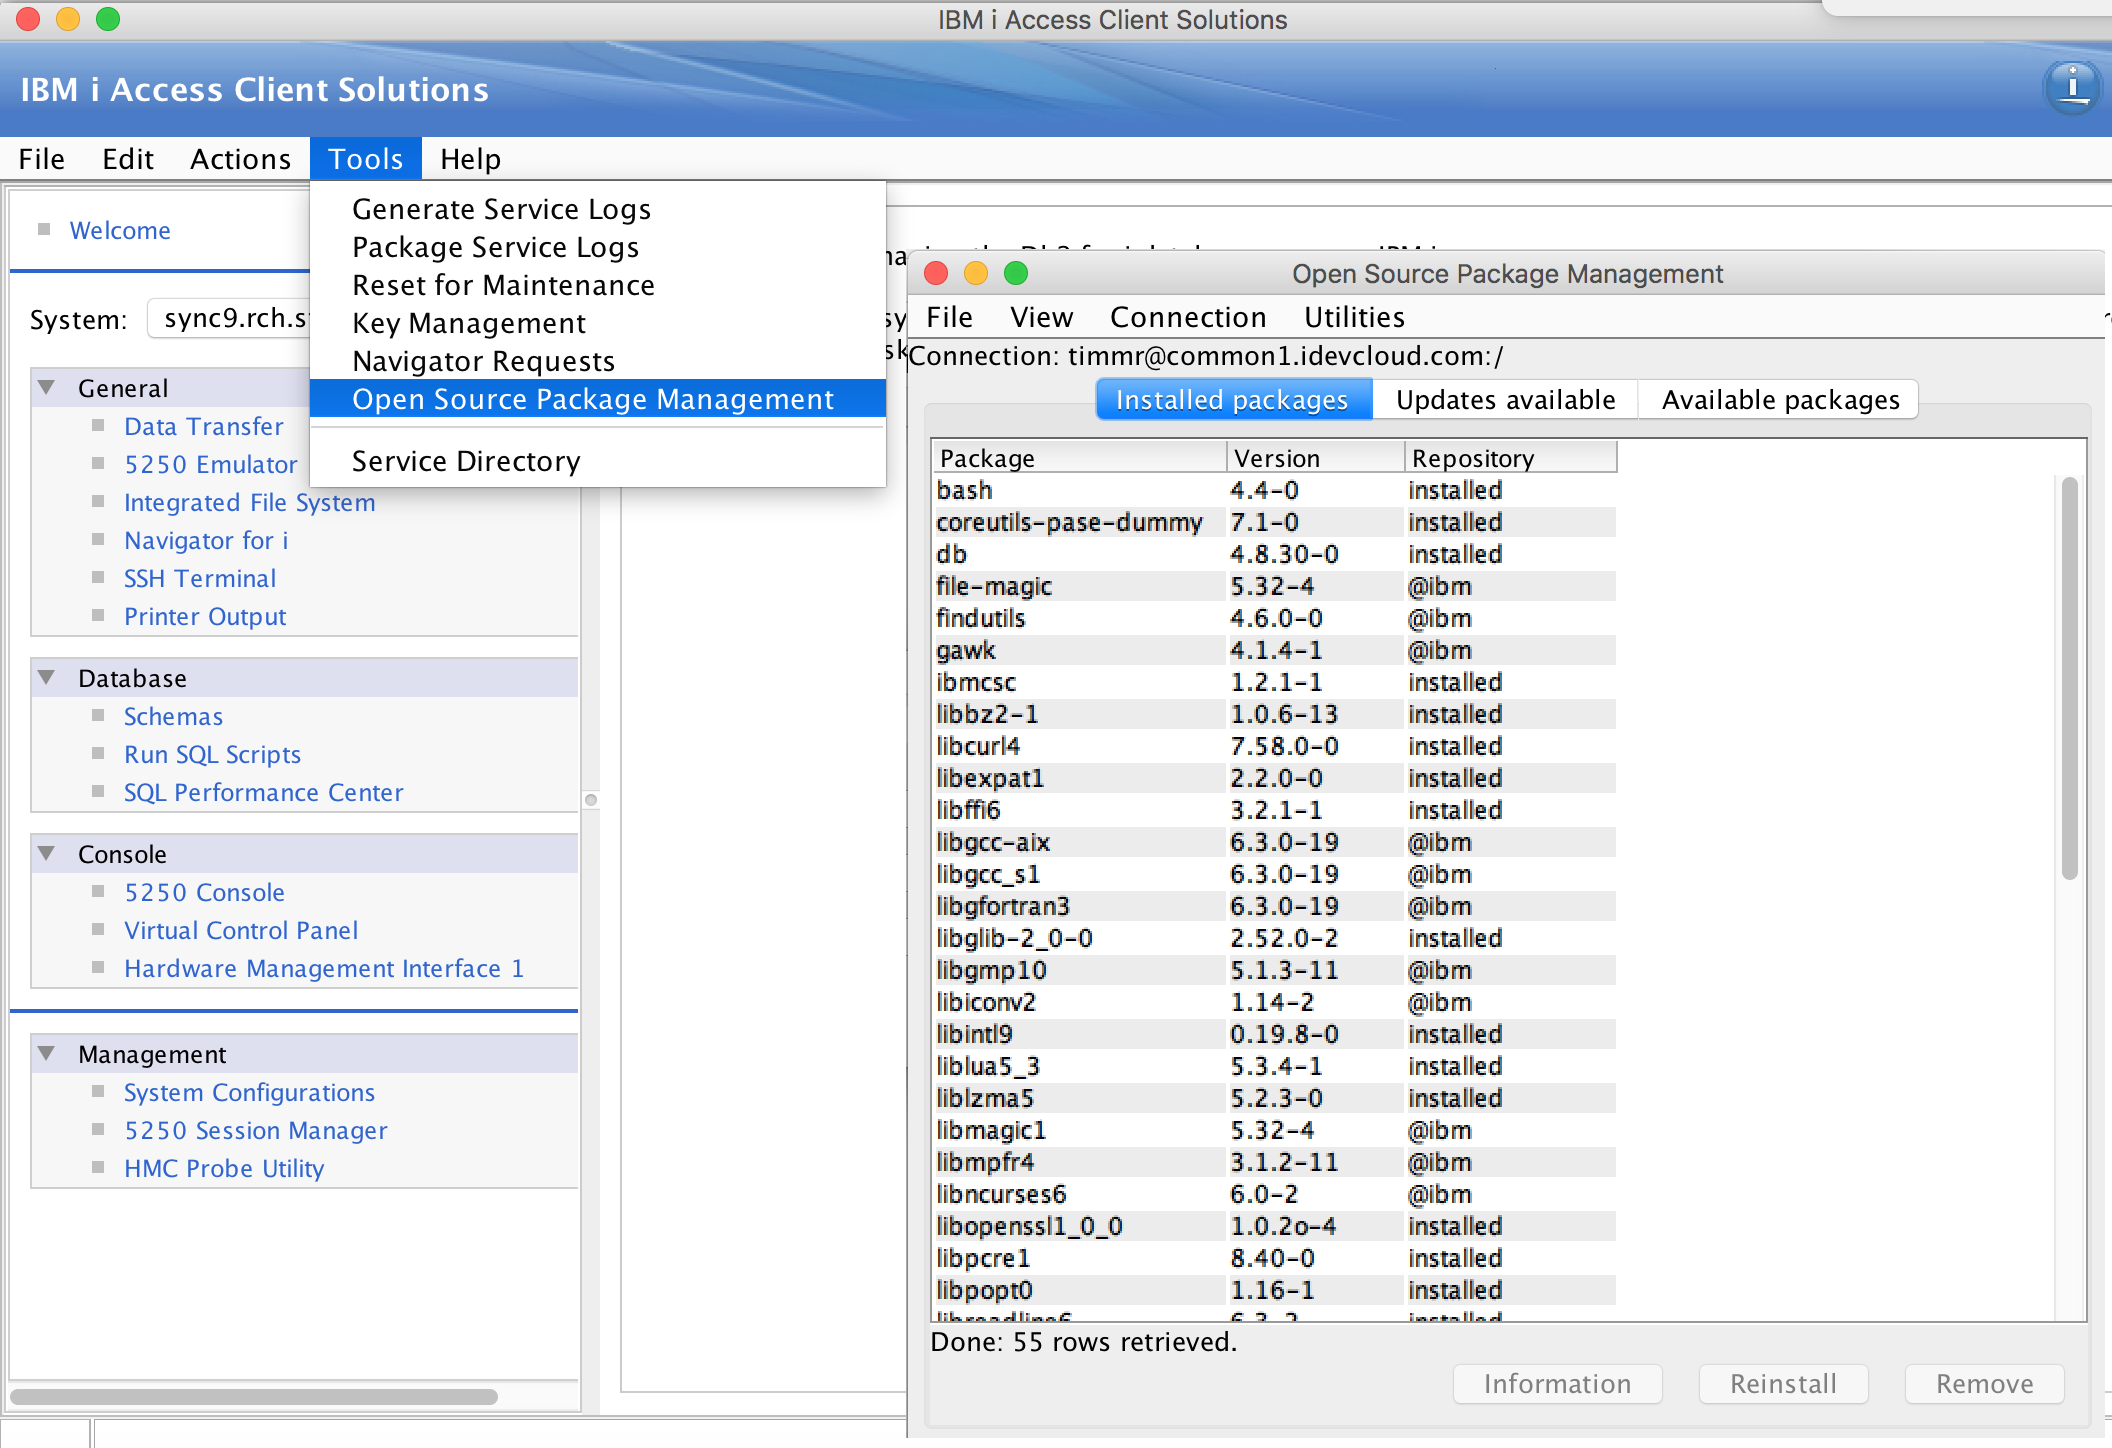 Interface to view and manage the RPM distributions on your IBM i.